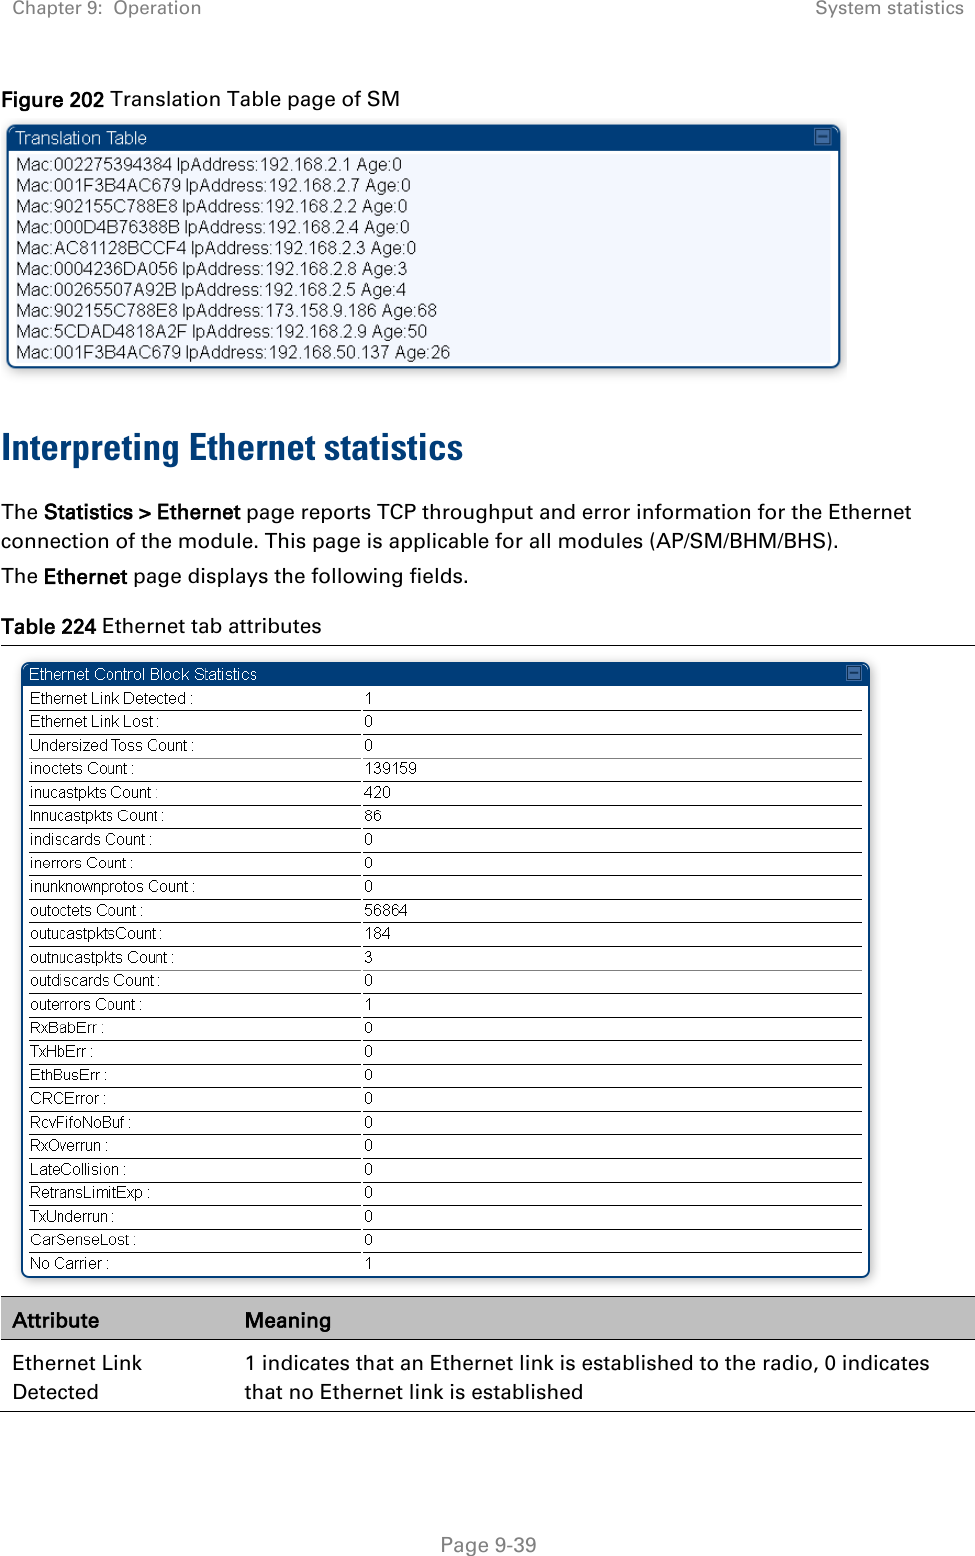 Chapter 9:  Operation System statistics   Page 9-39 Figure 202 Translation Table page of SM  Interpreting Ethernet statistics The Statistics &gt; Ethernet page reports TCP throughput and error information for the Ethernet connection of the module. This page is applicable for all modules (AP/SM/BHM/BHS). The Ethernet page displays the following fields. Table 224 Ethernet tab attributes  Attribute Meaning Ethernet Link Detected 1 indicates that an Ethernet link is established to the radio, 0 indicates that no Ethernet link is established 